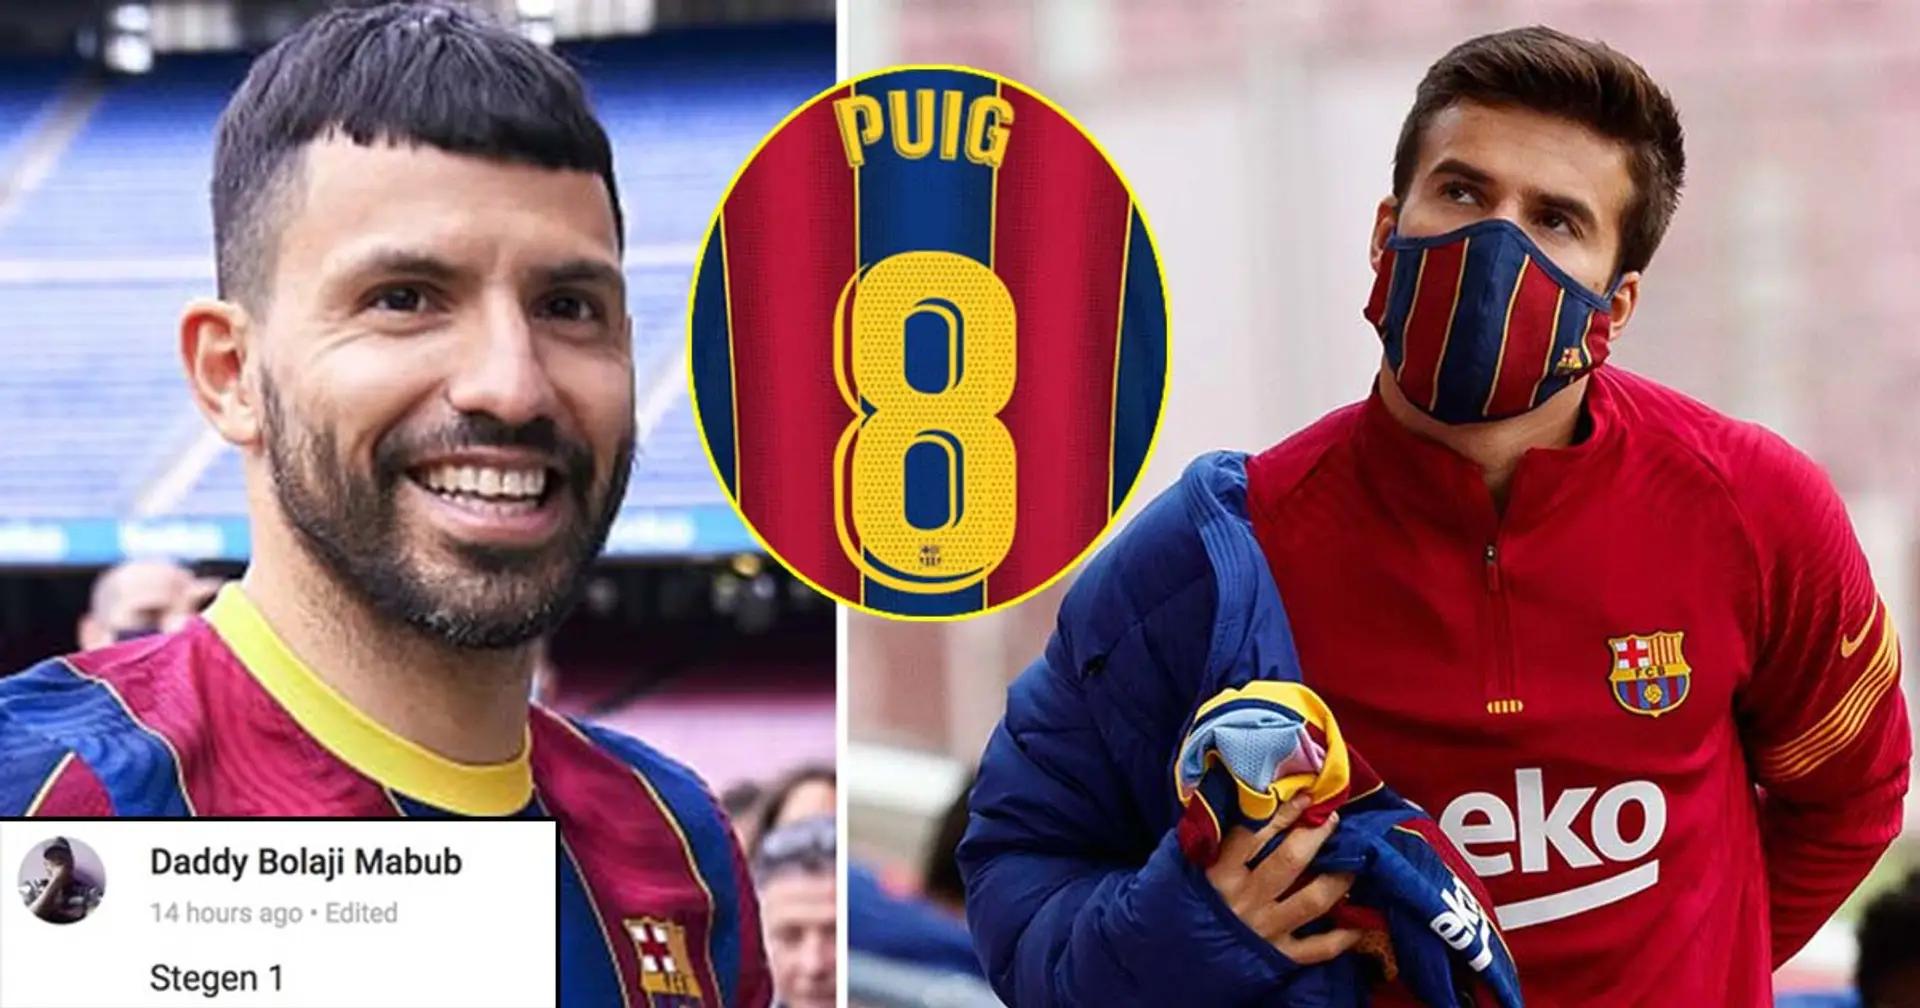 Aguero 9, Pedri-Puig to carry Xavi-Iniesta shirts: Fan perfectly distributes Barca's squad numbers